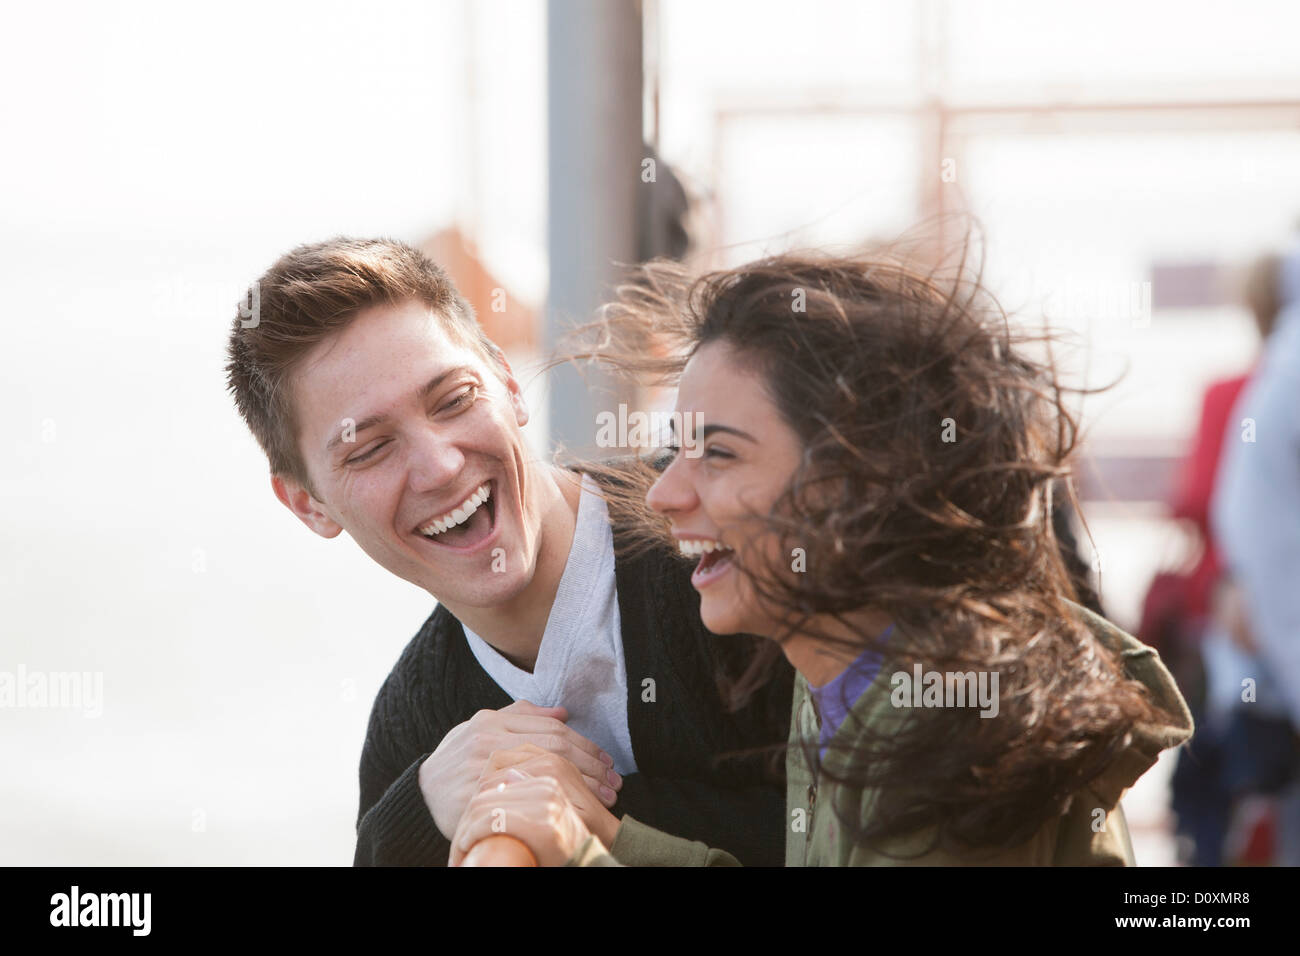 Young couple on ferry, laughing Stock Photo